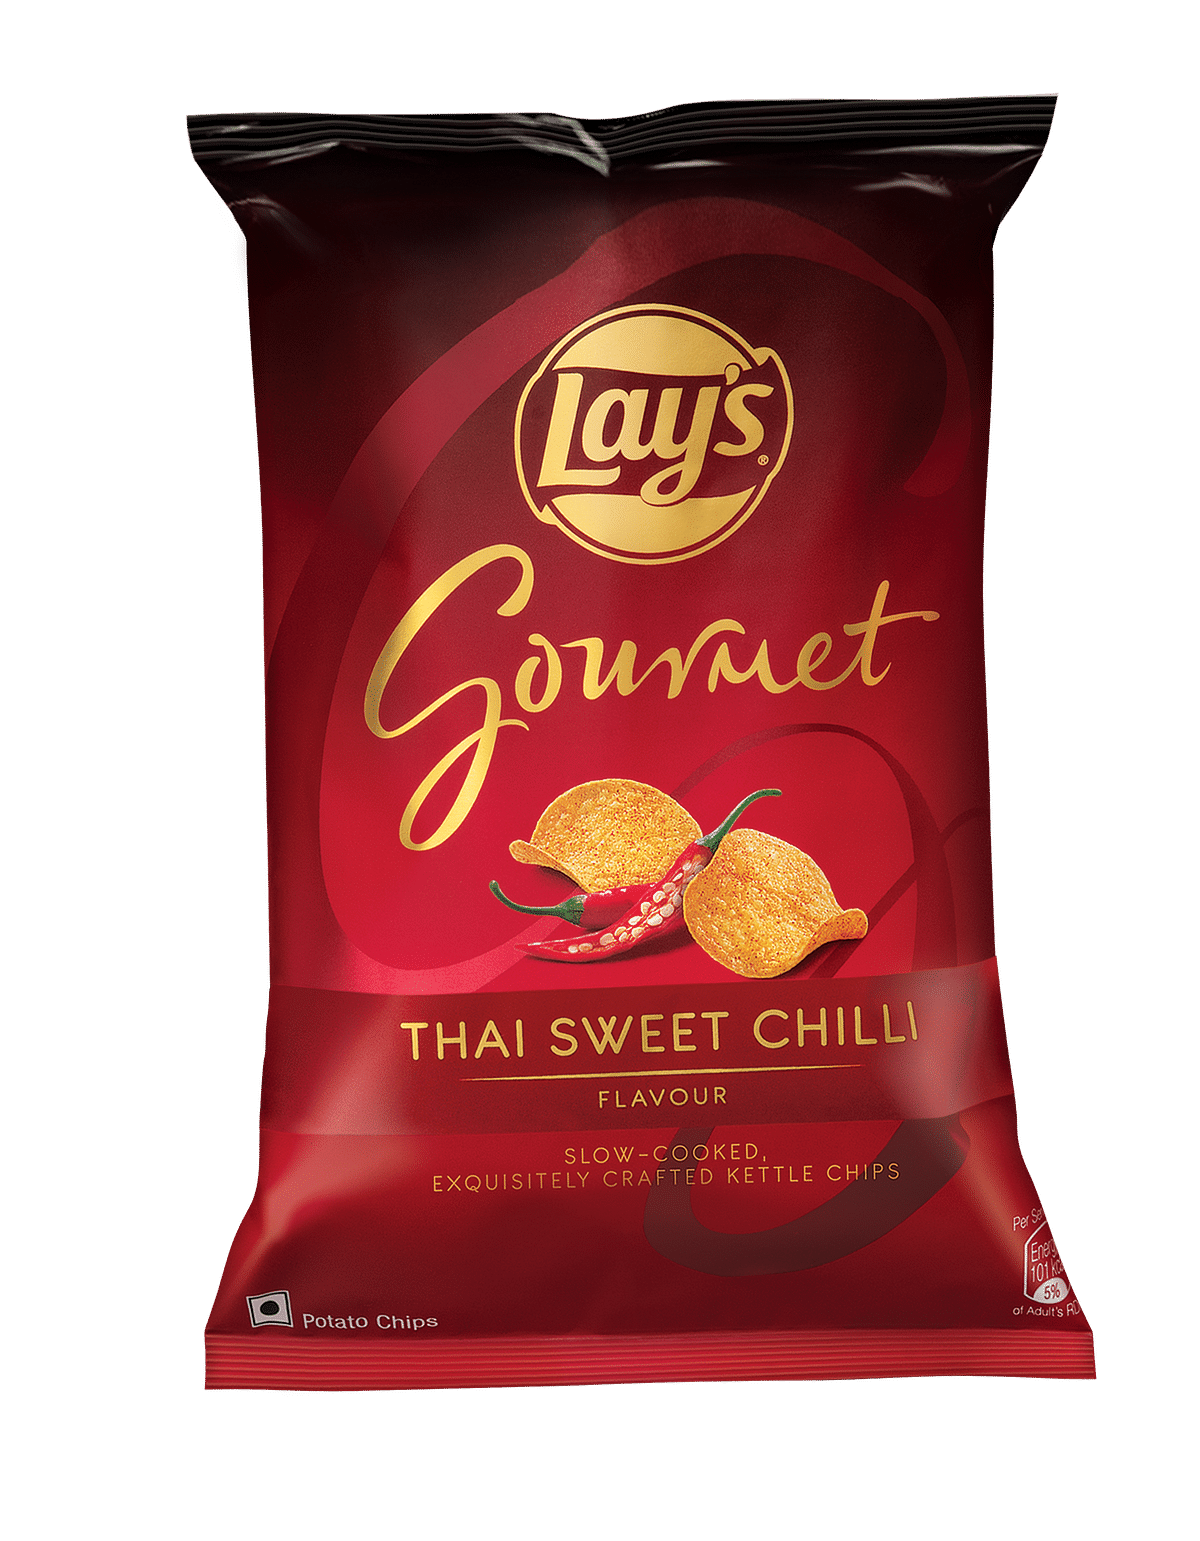 Gourmet is the flavour of the season for Lay's chips